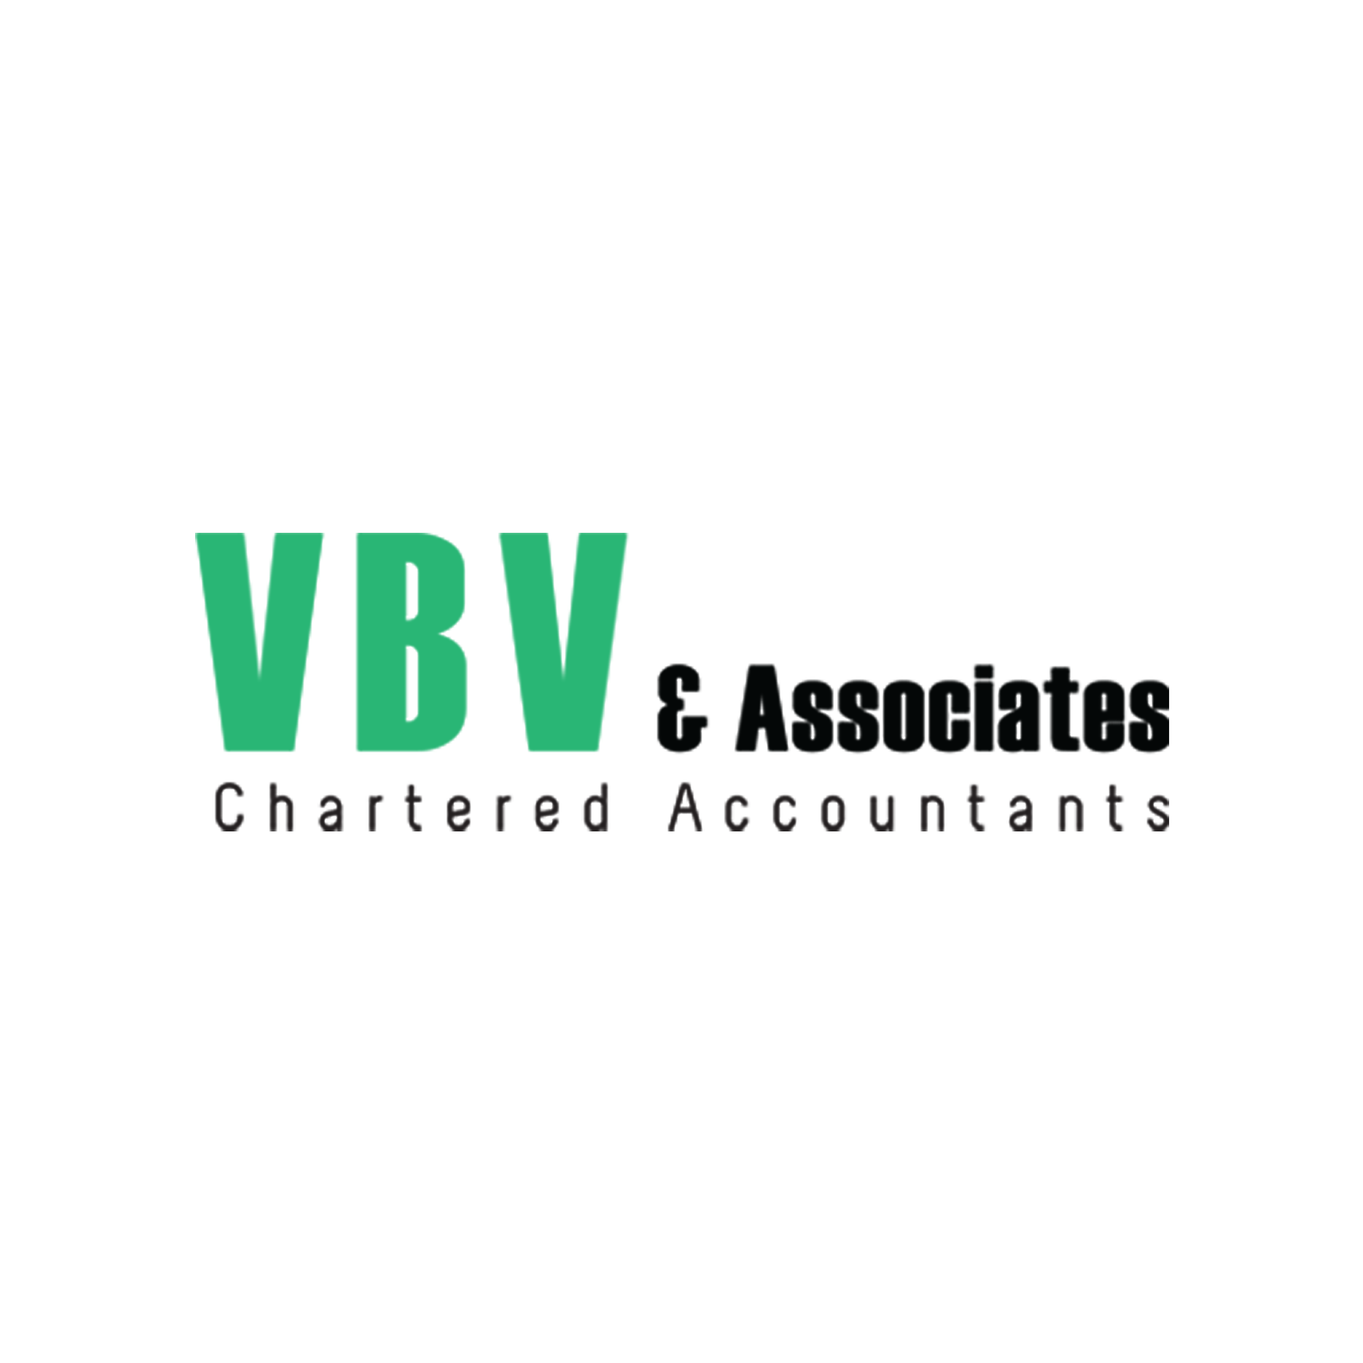 VBV & Associates|Accounting Services|Professional Services